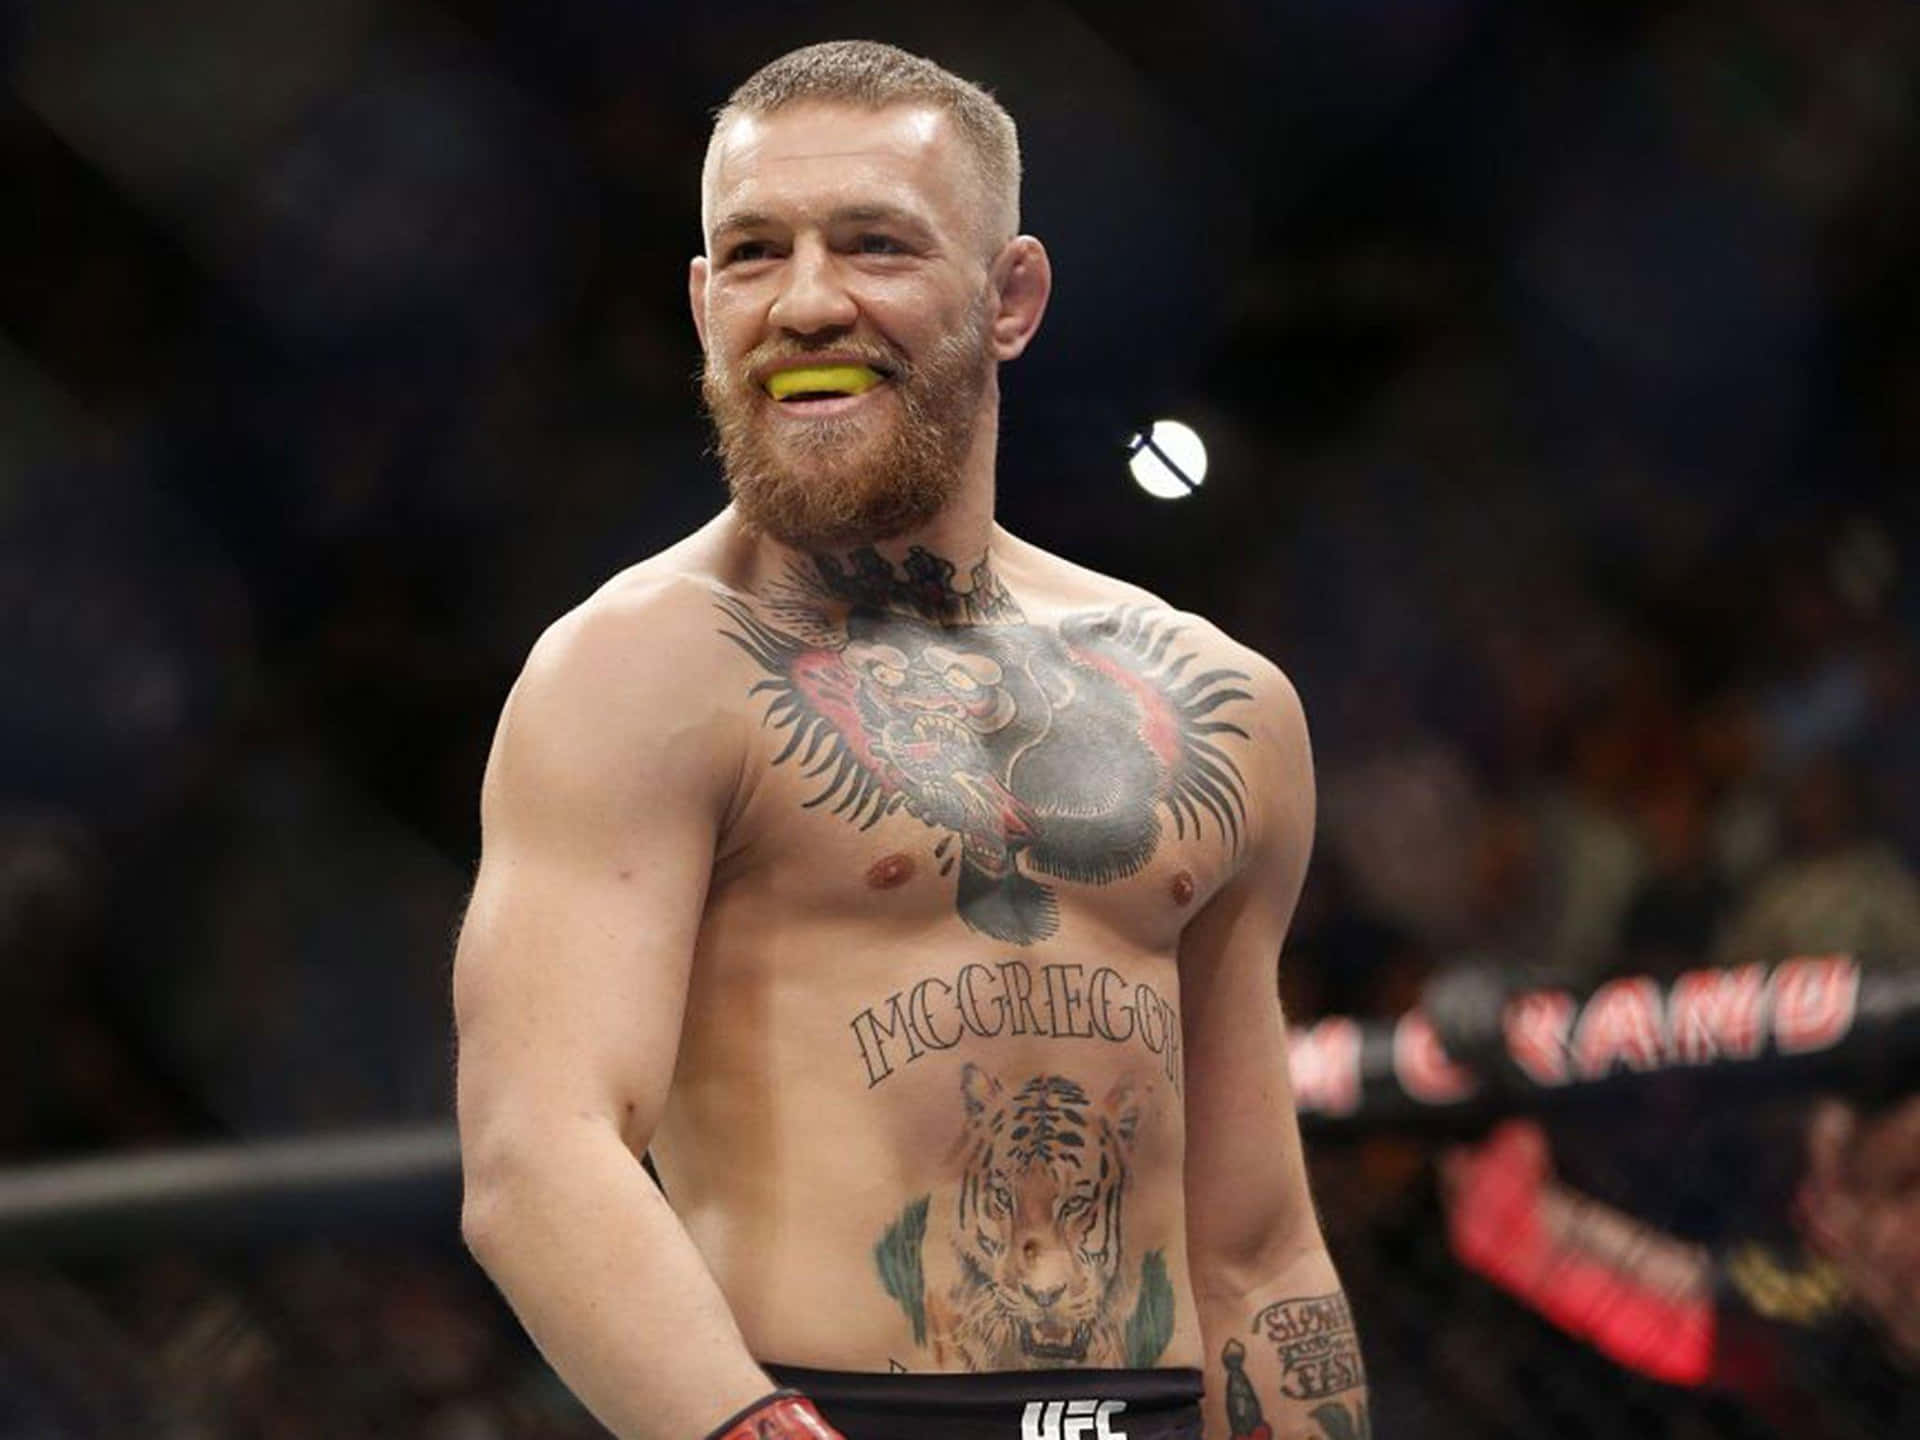 "Conor McGregor: Taking the MMA World by Storm"